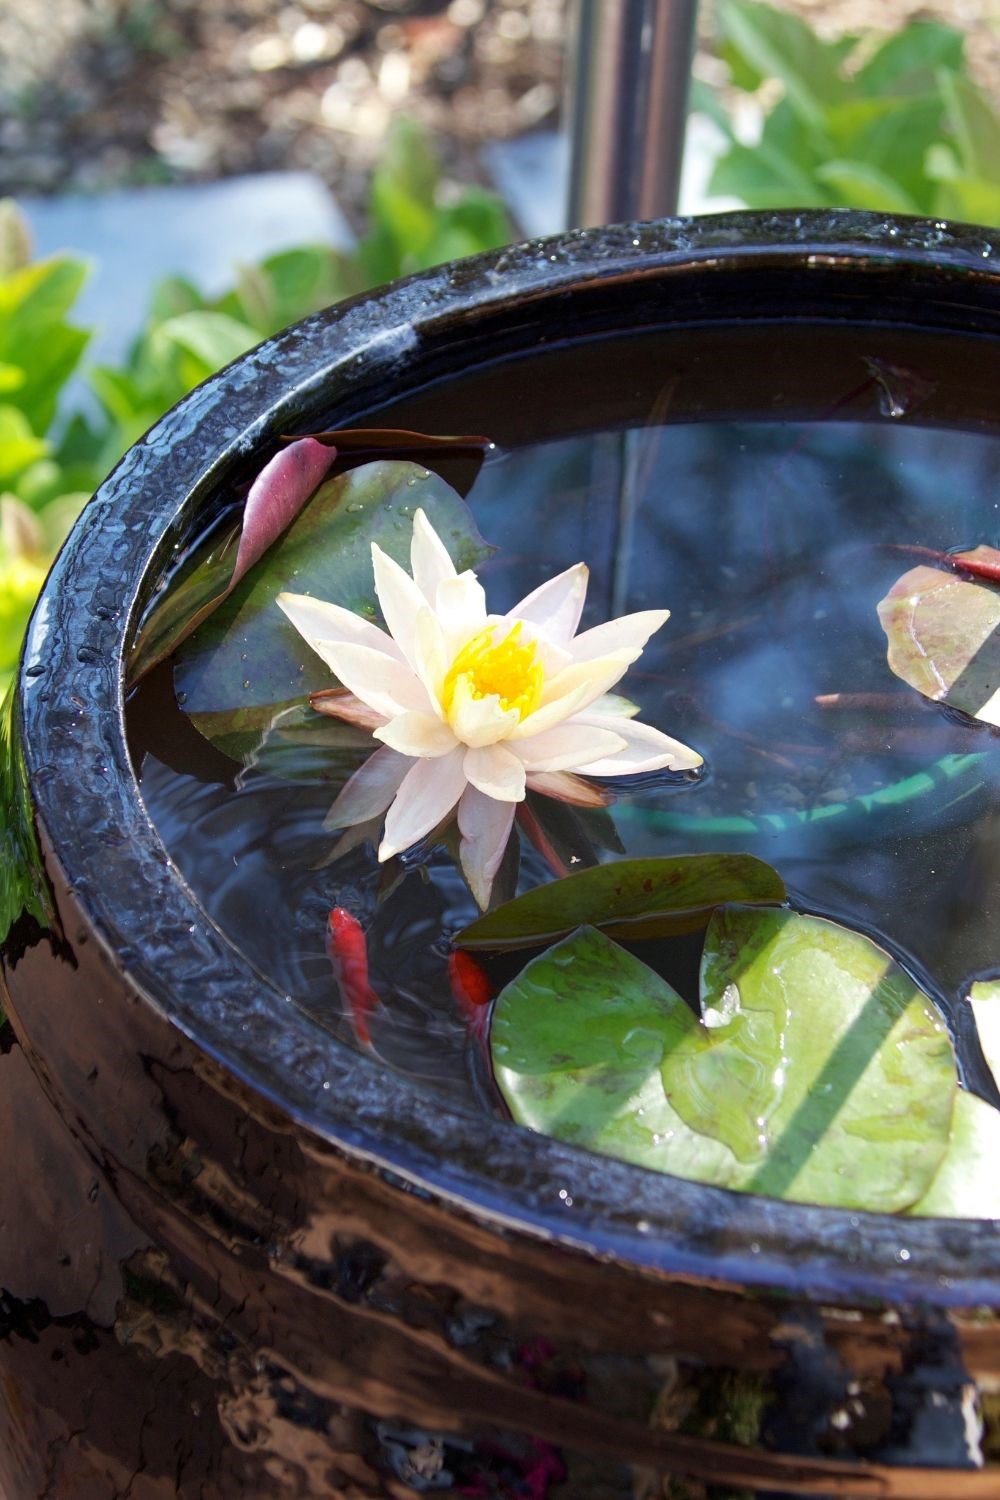 How to make a garden pond using a pot | Better Homes and Gardens